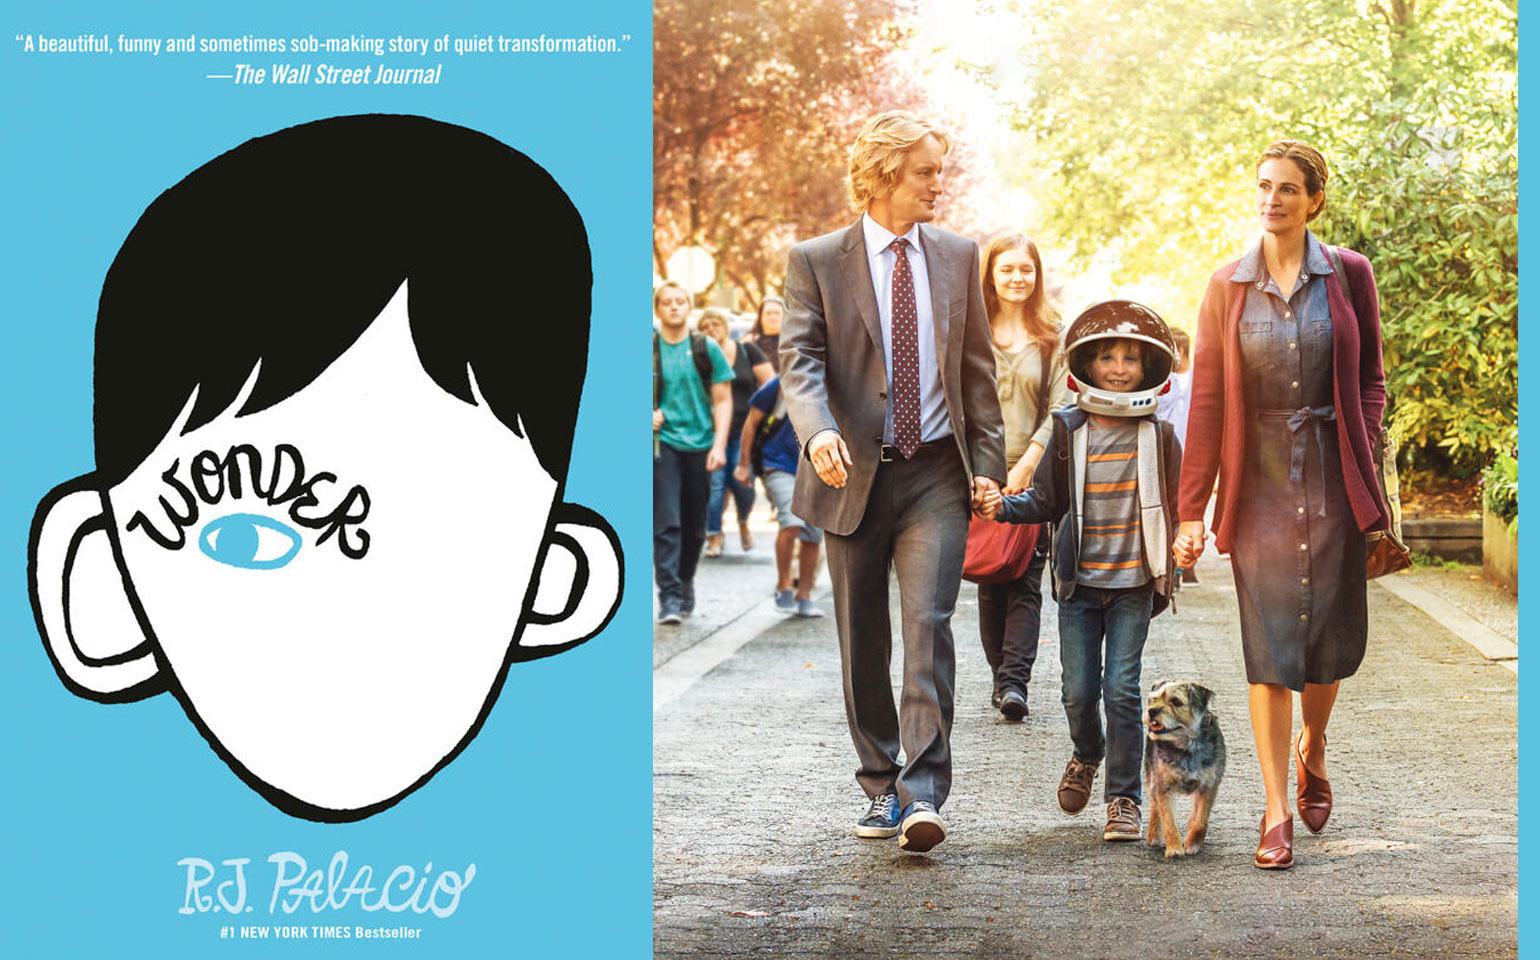 Both the cover of Wonder in novel form and movie form are pictored, the novel cover features a person with one eye open, the movie cover is a family walking down a sunny street.